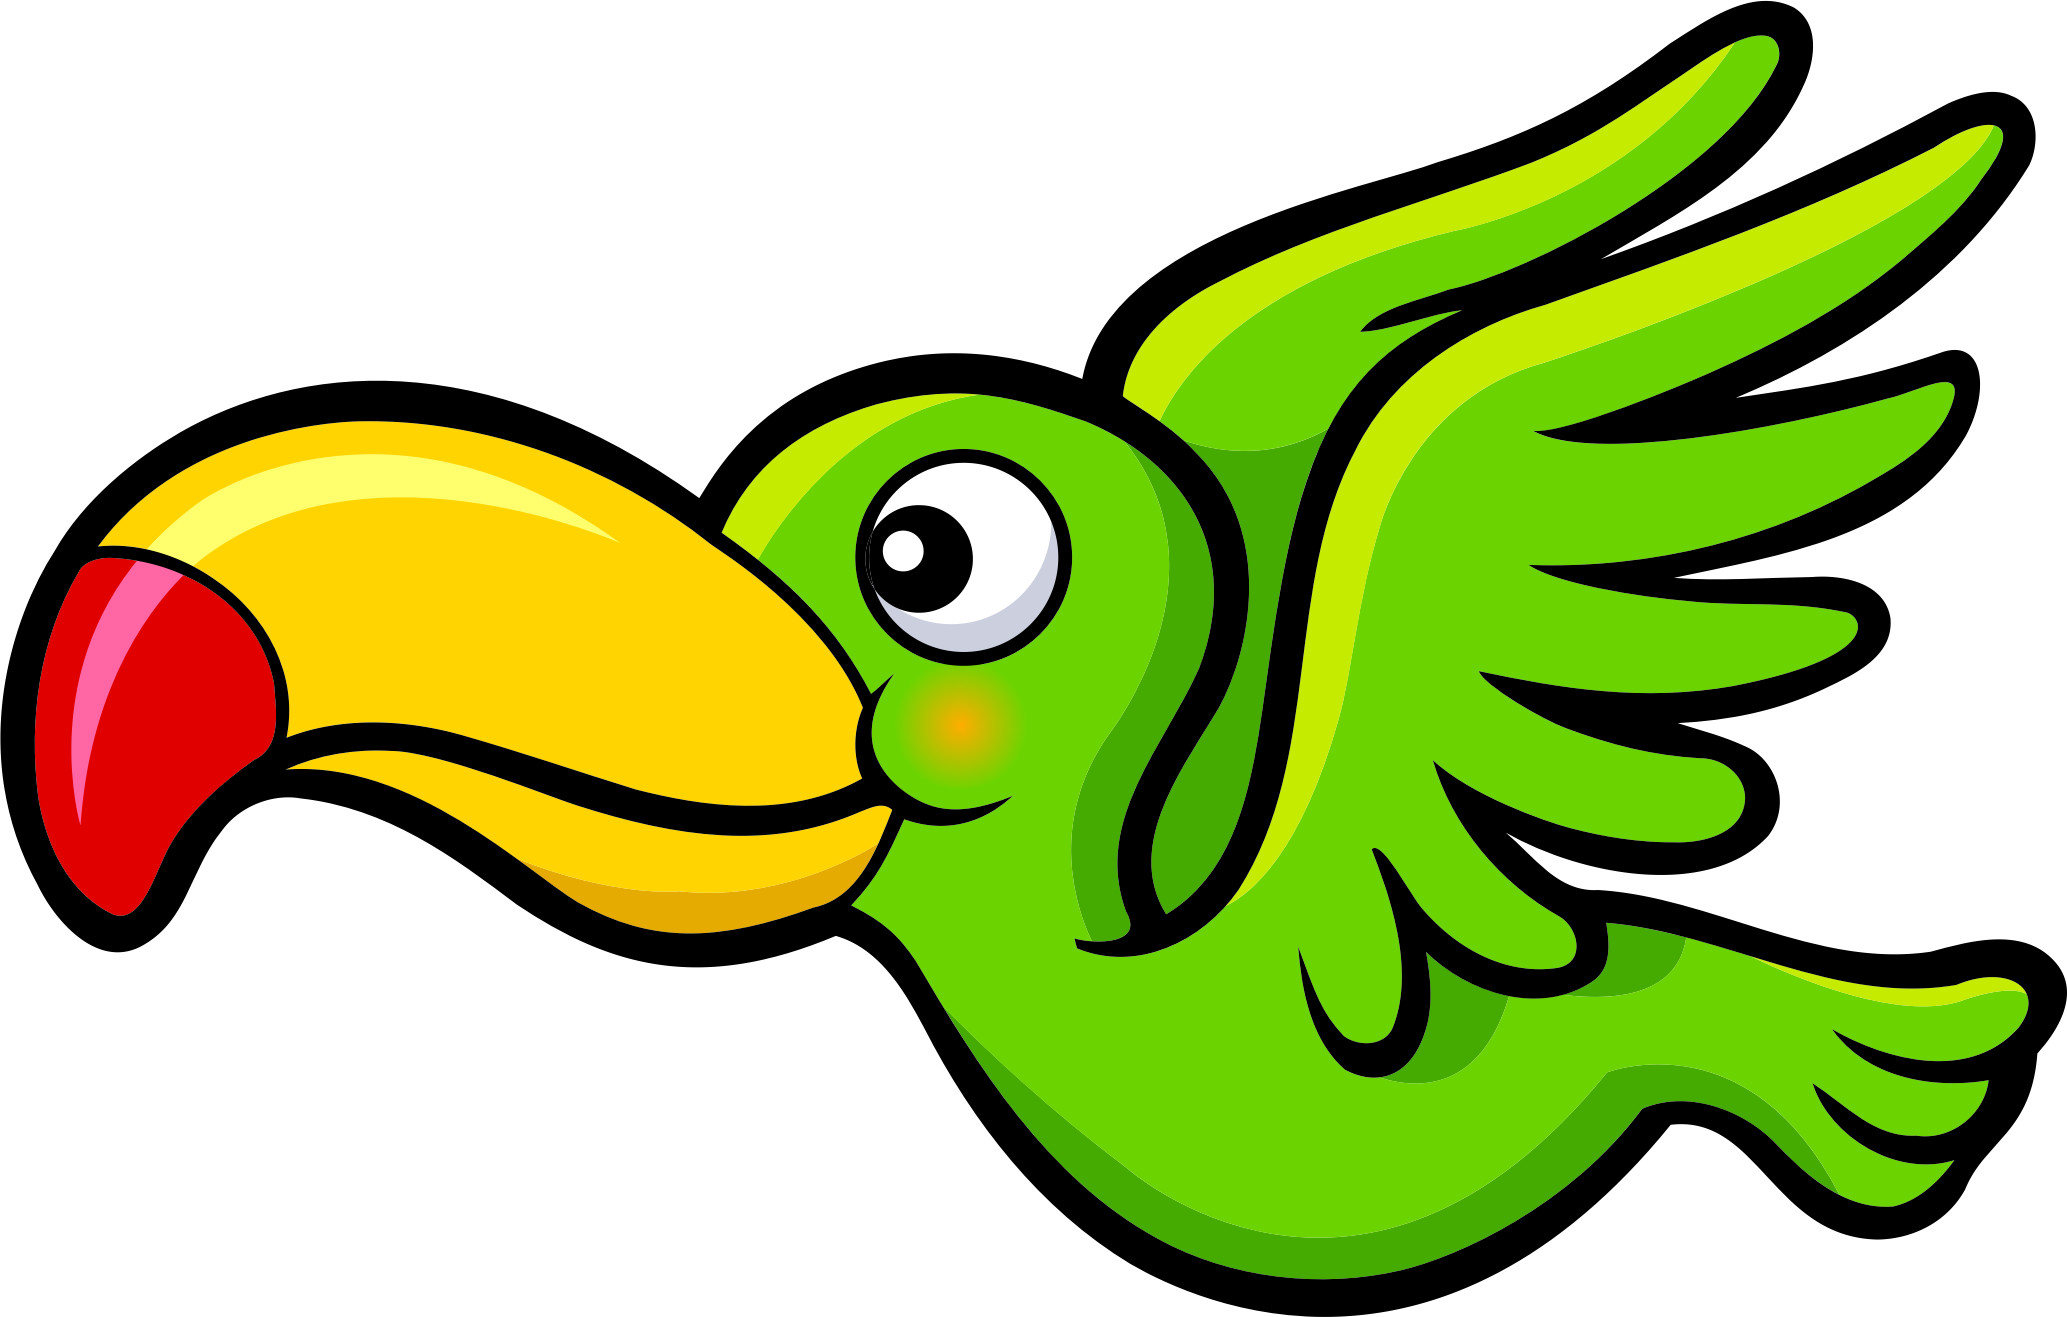 Flying bird big image. Wing clipart animated